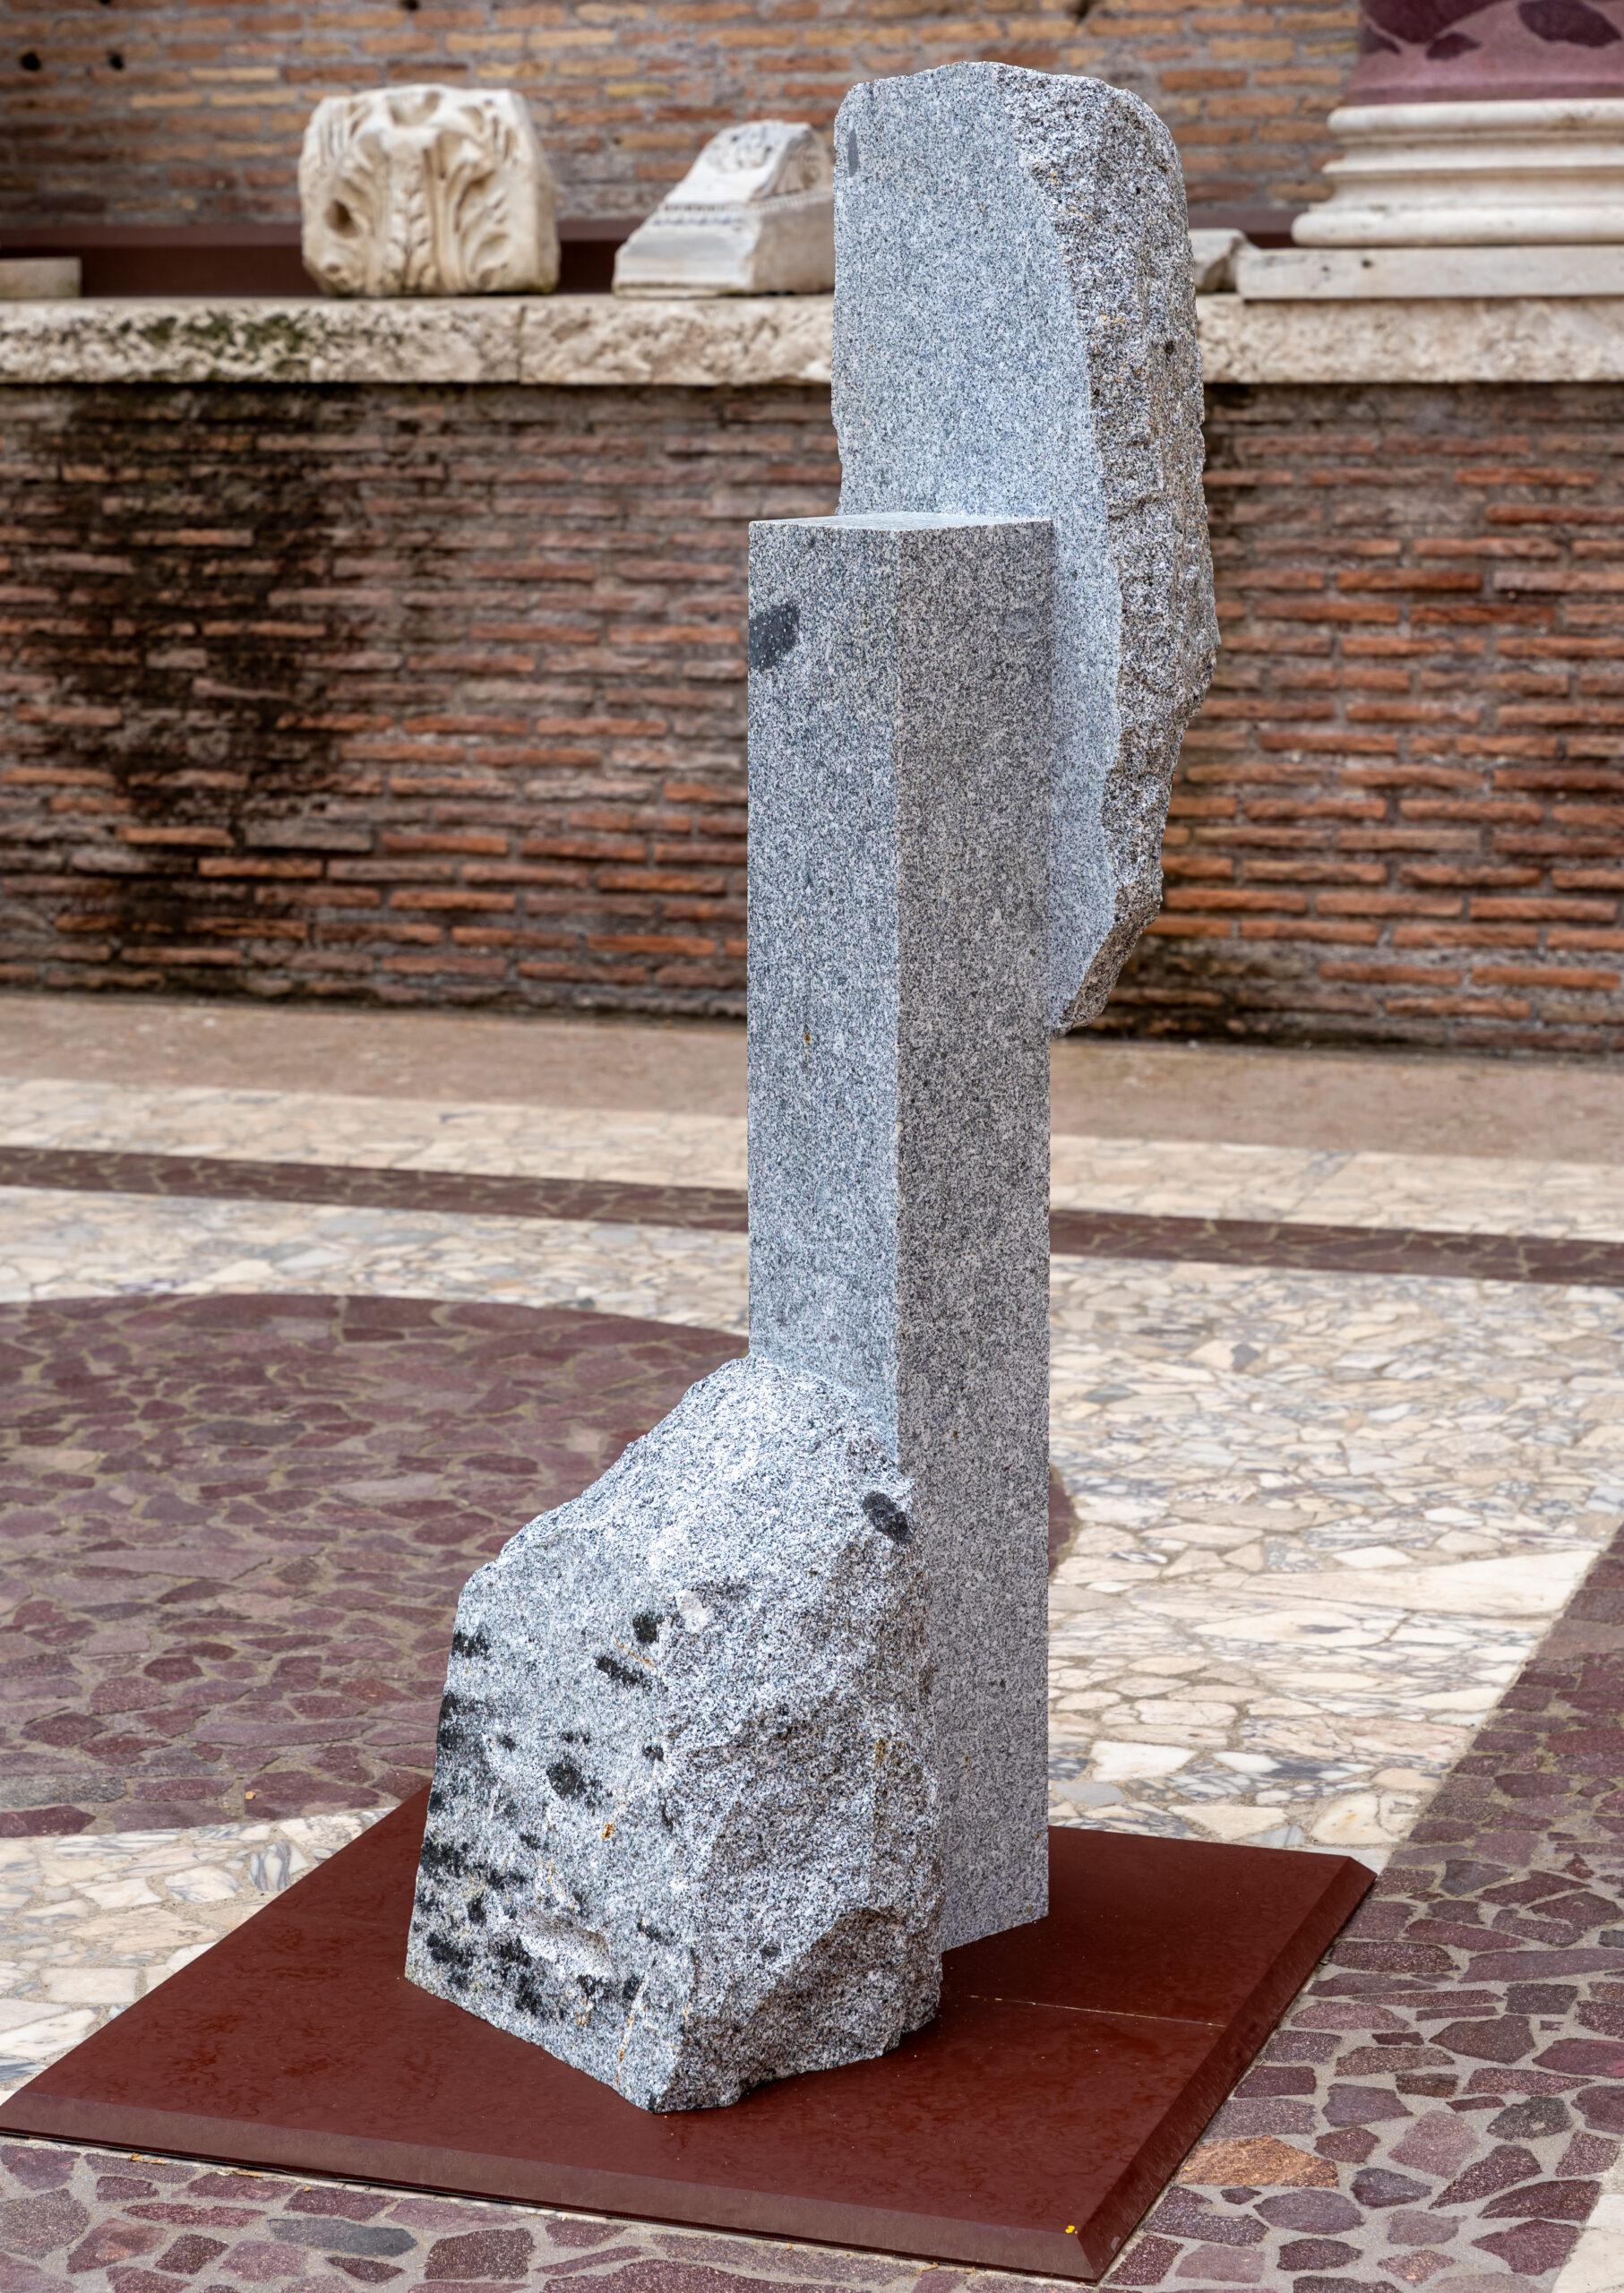 Korè-Elba granite is a unique monumental sculpture by contemporary artist Mattia Bosco. This sculpture is made of Elba granite, dimensions are 176.5 × 48 × 88.5 cm (69.5 × 18.9 × 34.8 in). 

This piece is a part of a collection of twelve sculptures,